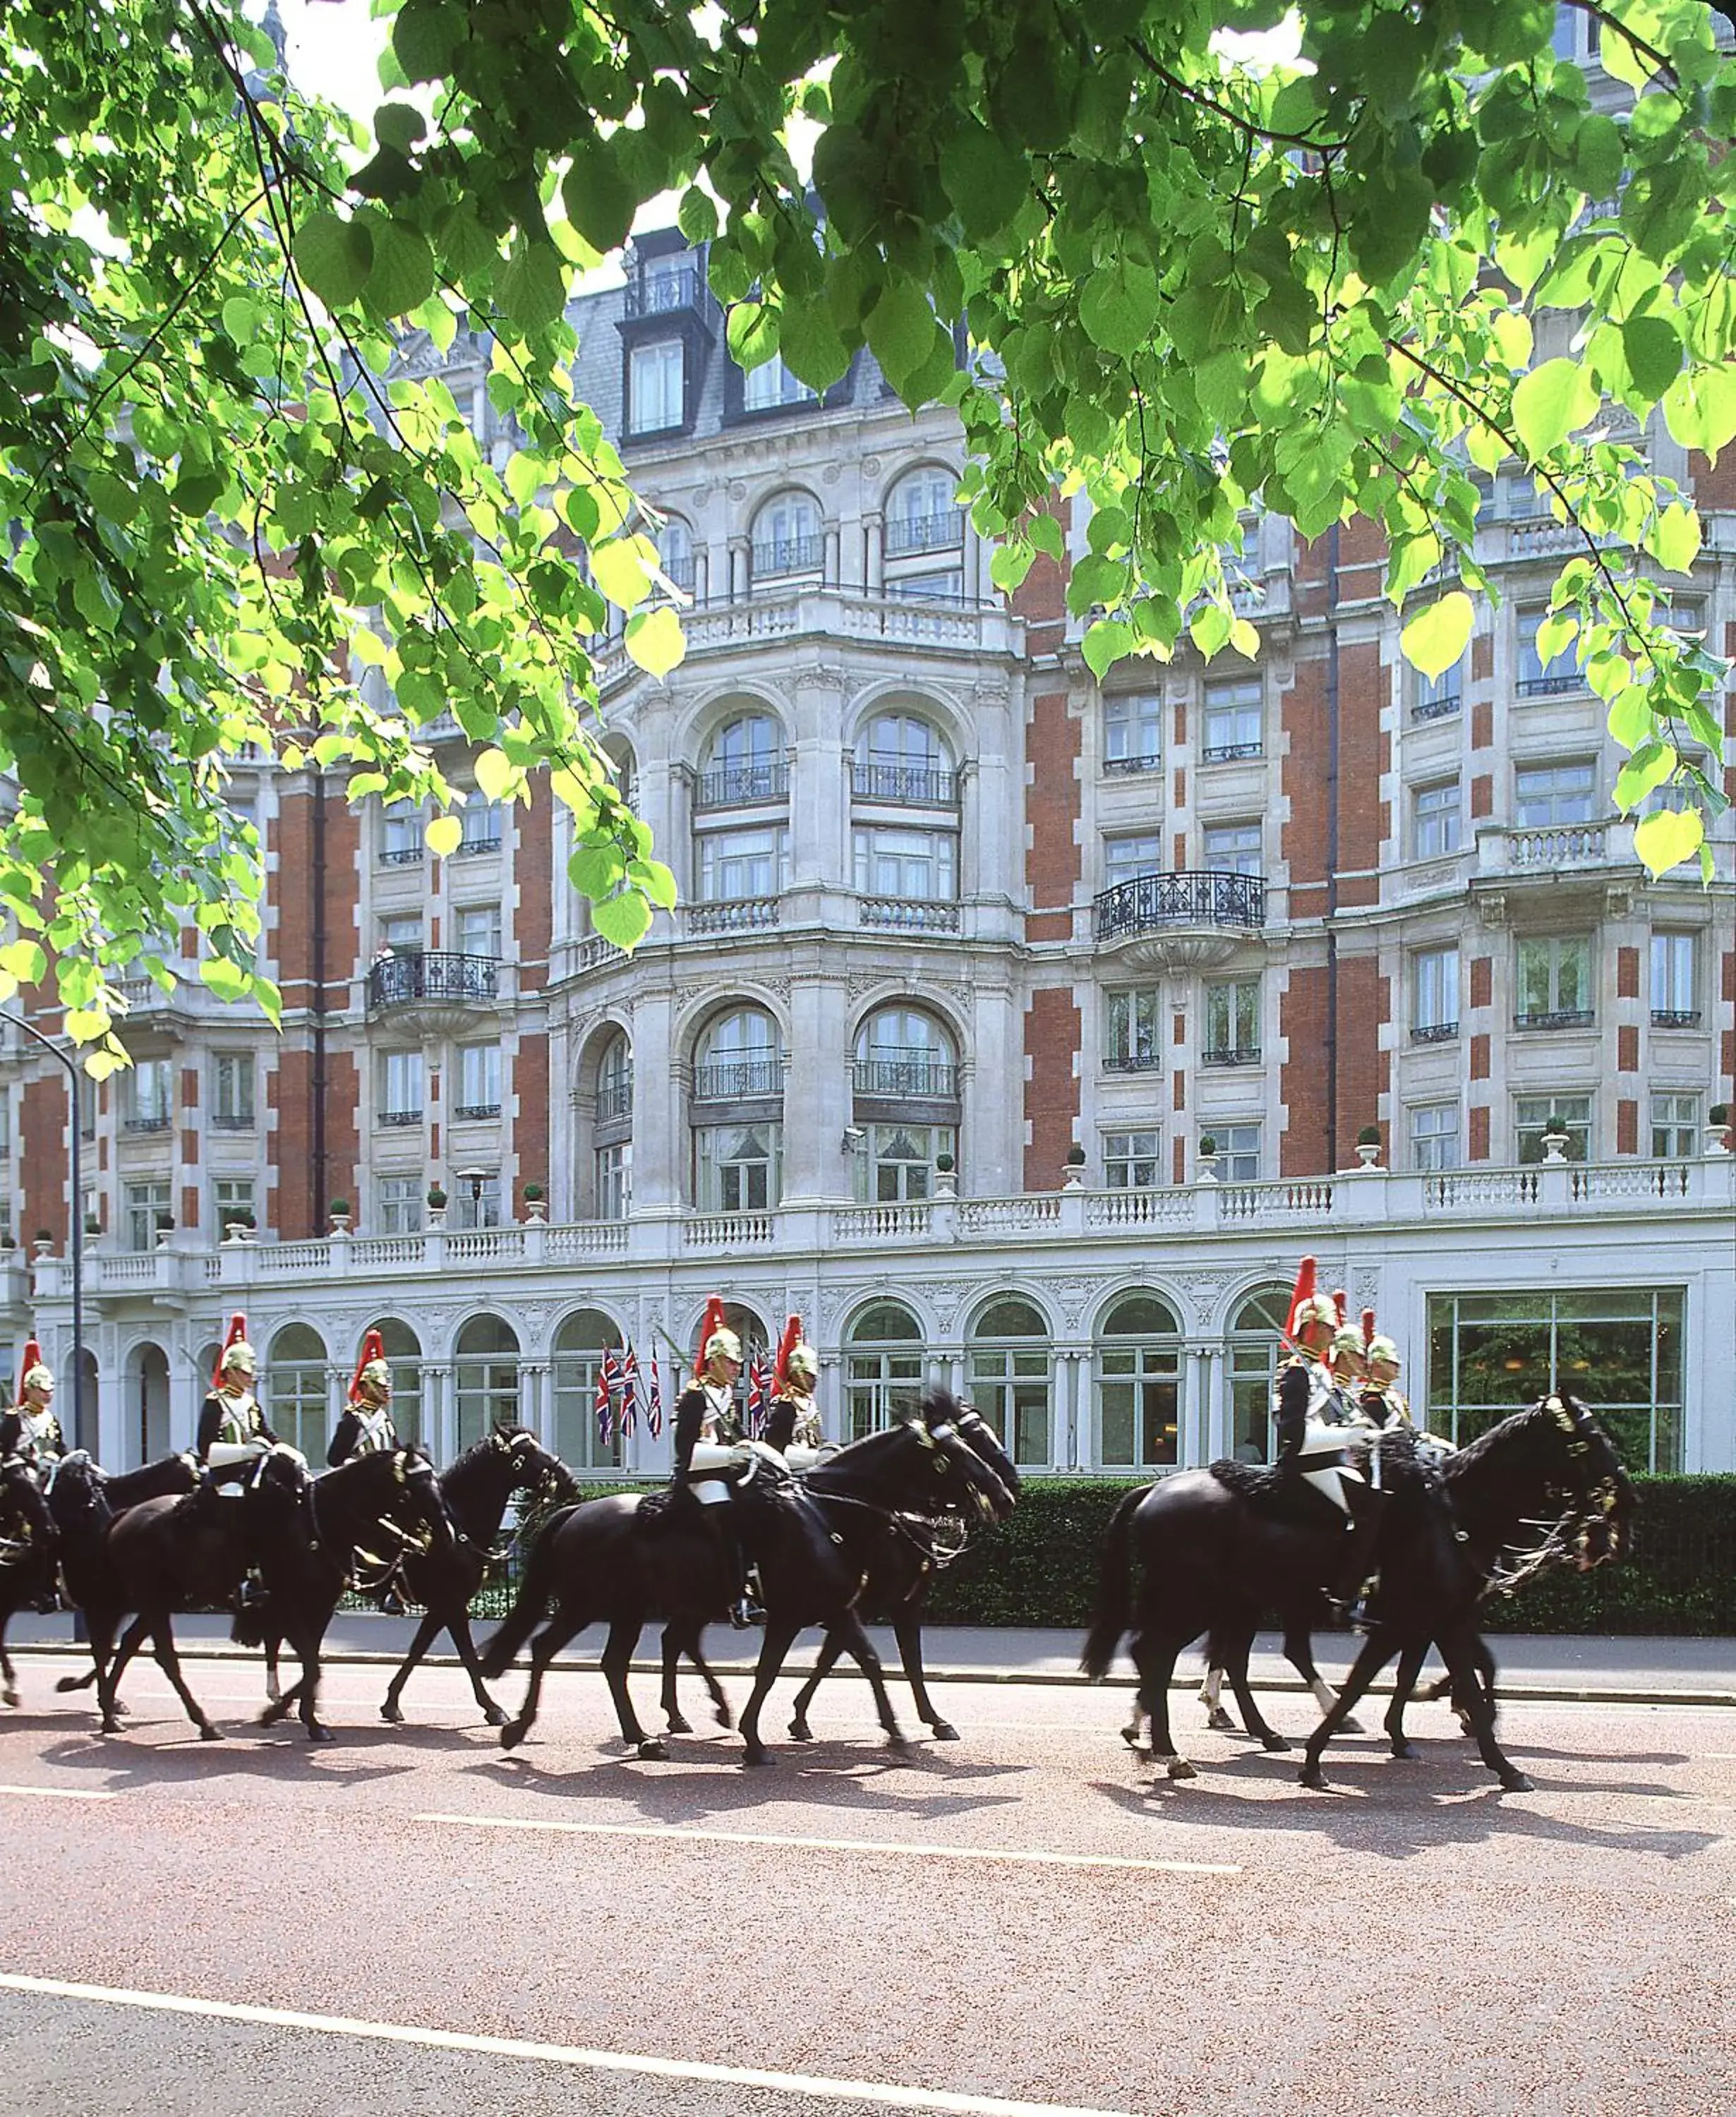 Off site, Other Animals in Mandarin Oriental Hyde Park, London